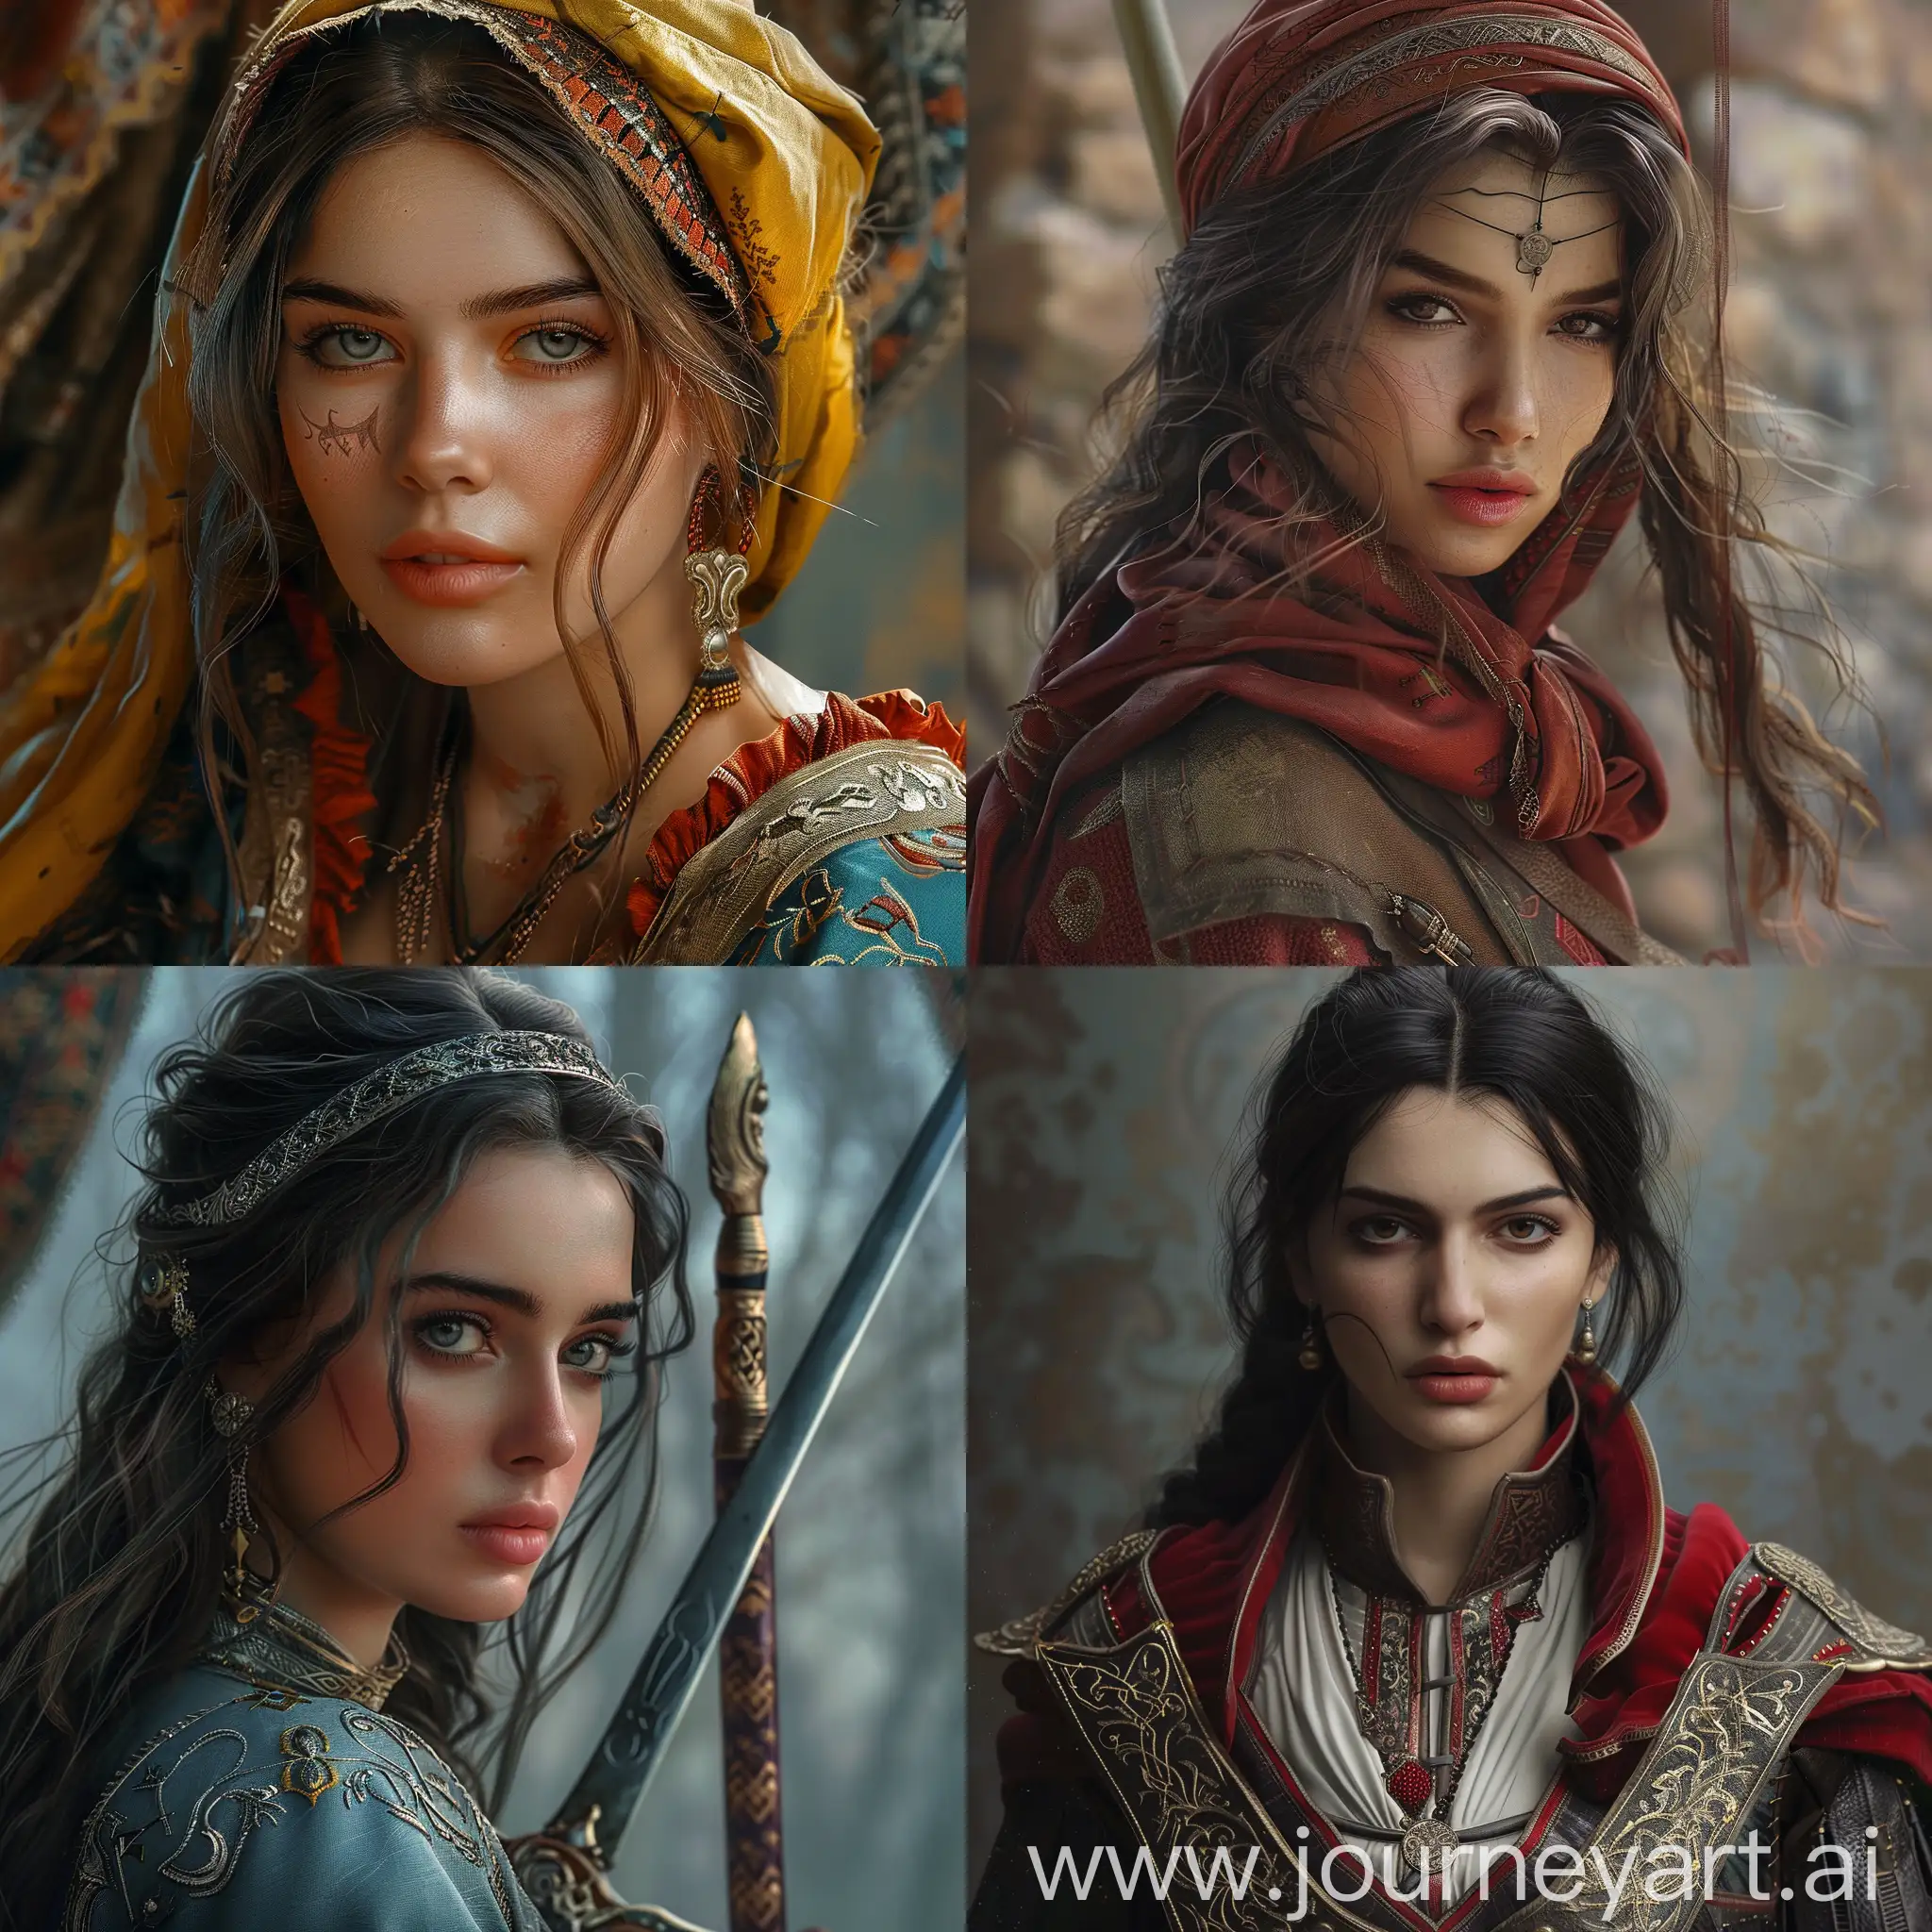 Medieval-Turkish-Warrior-Beauty-Girl-in-Realistic-8K-Resolution